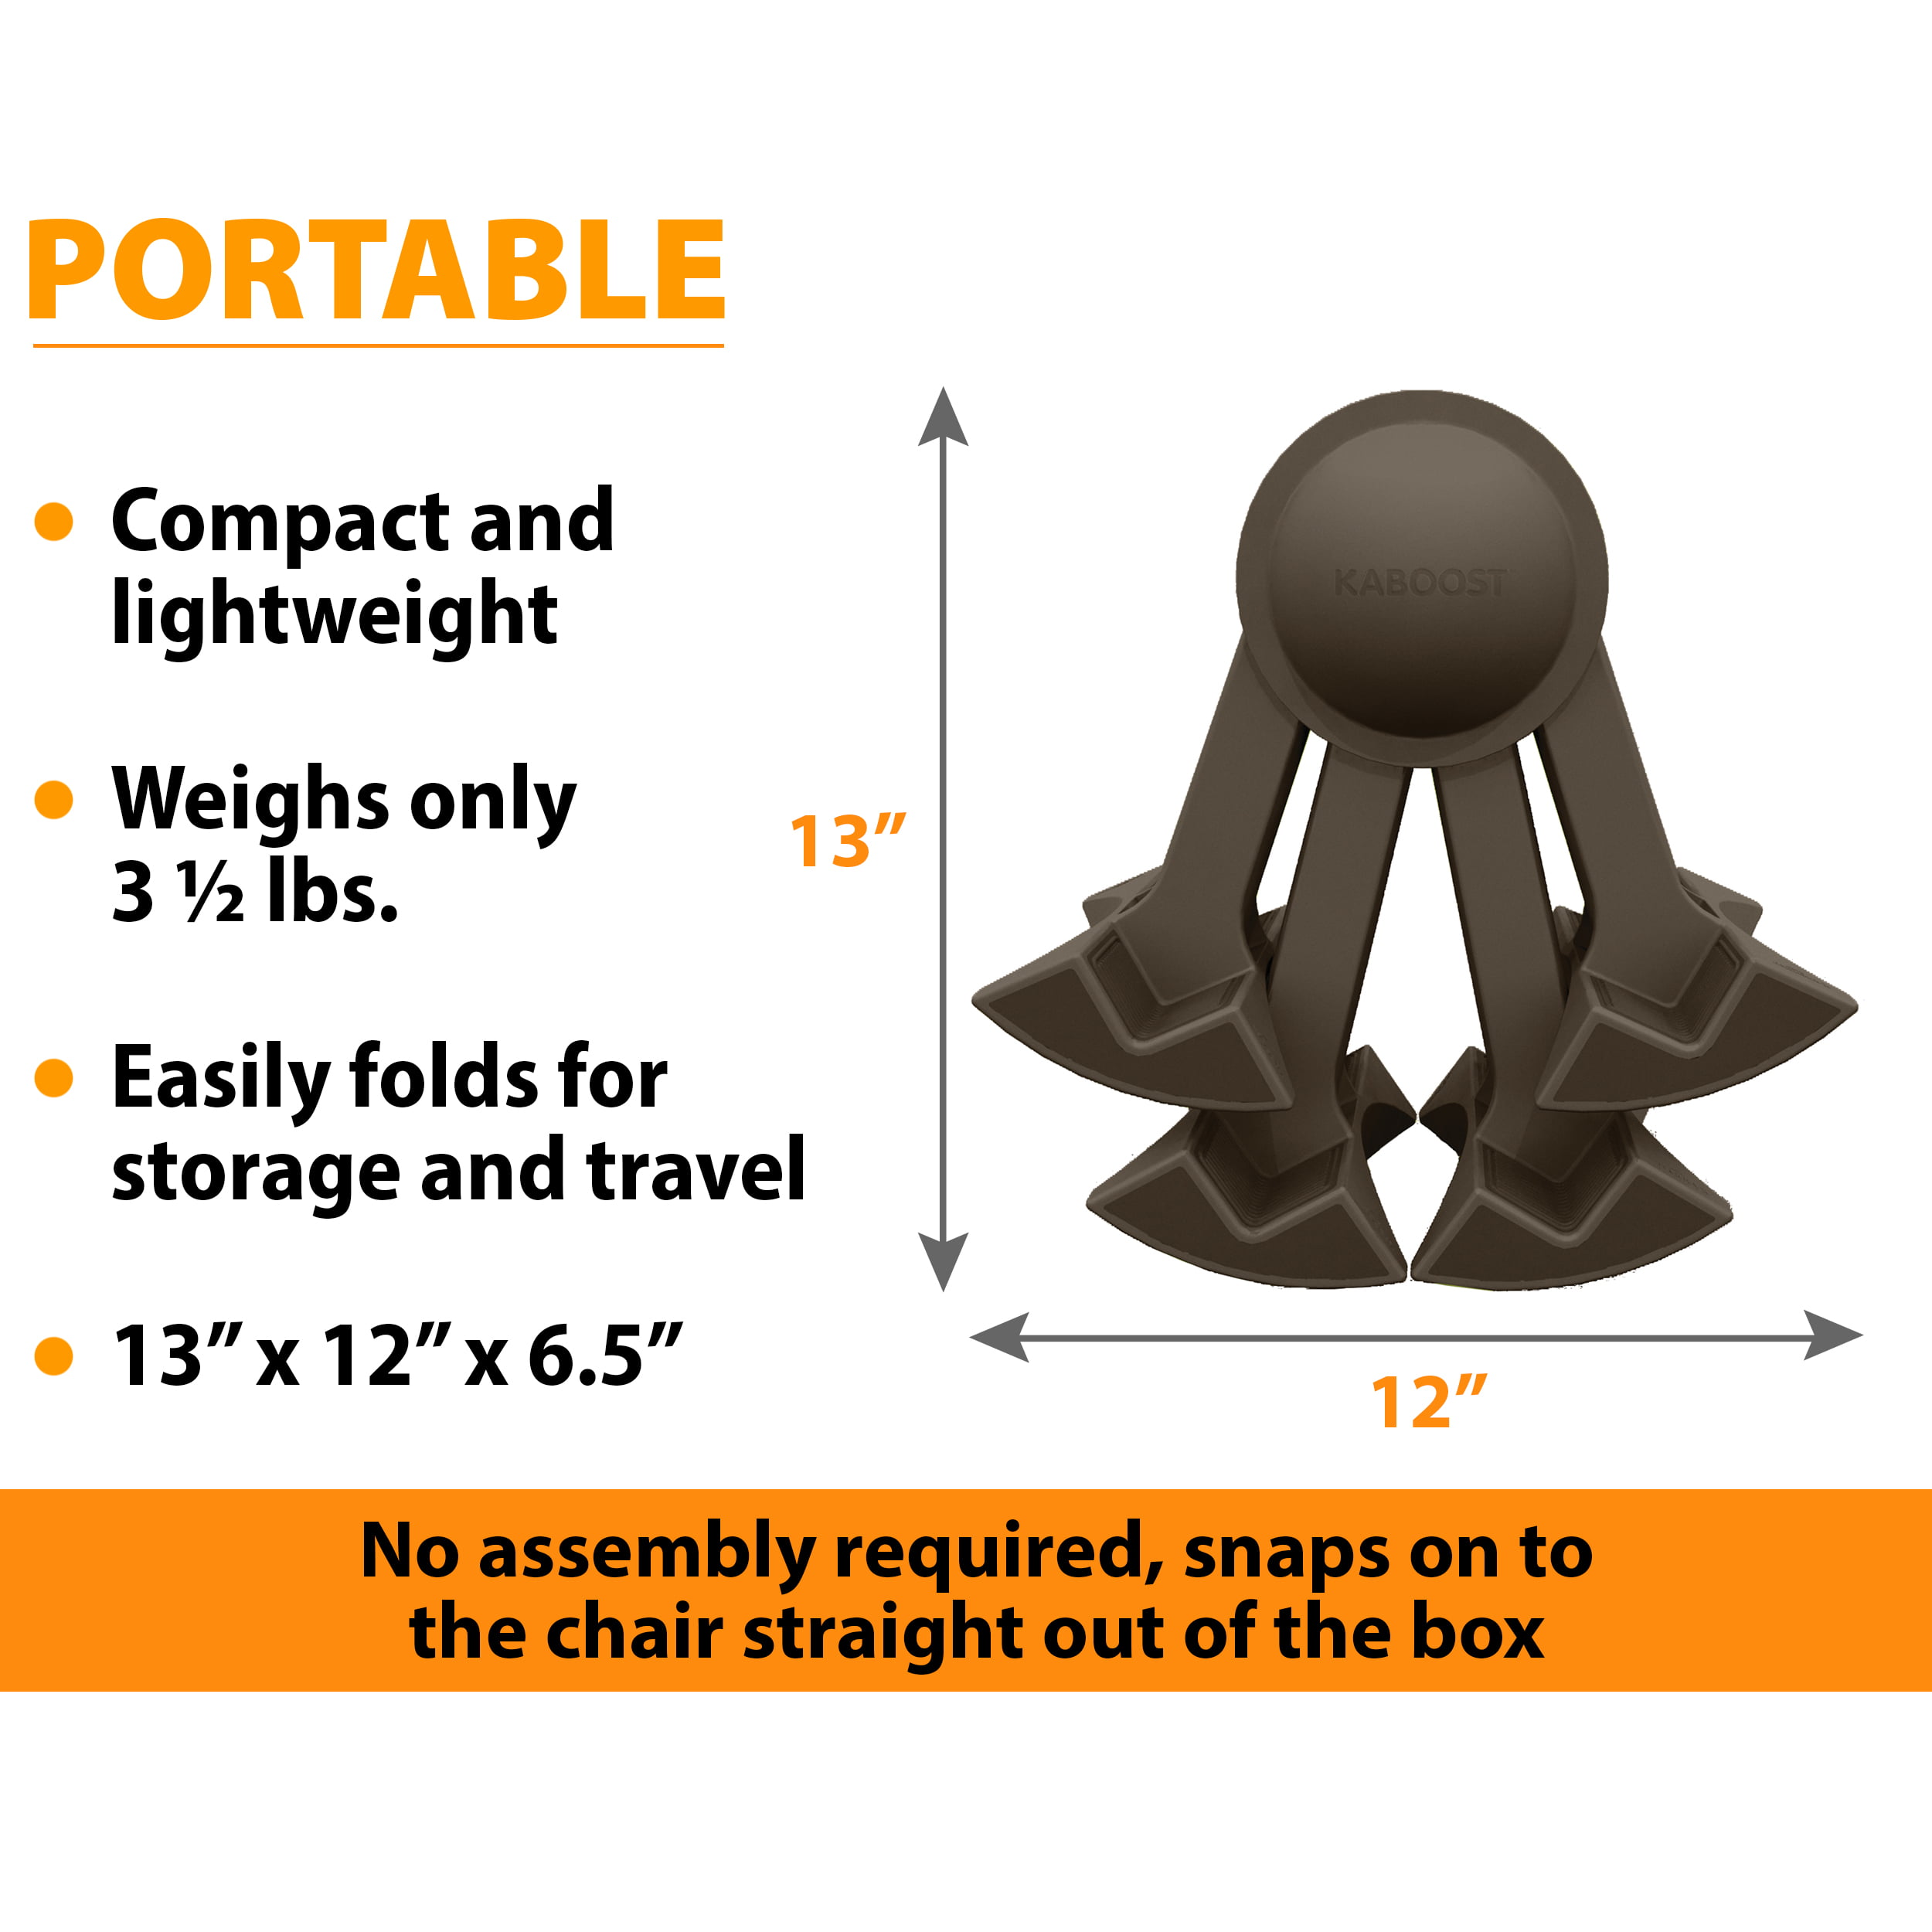 Charcoal Portable Chair Booster for Toddlers Goes Under The Chair KABOOST Booster Seat for Dining 